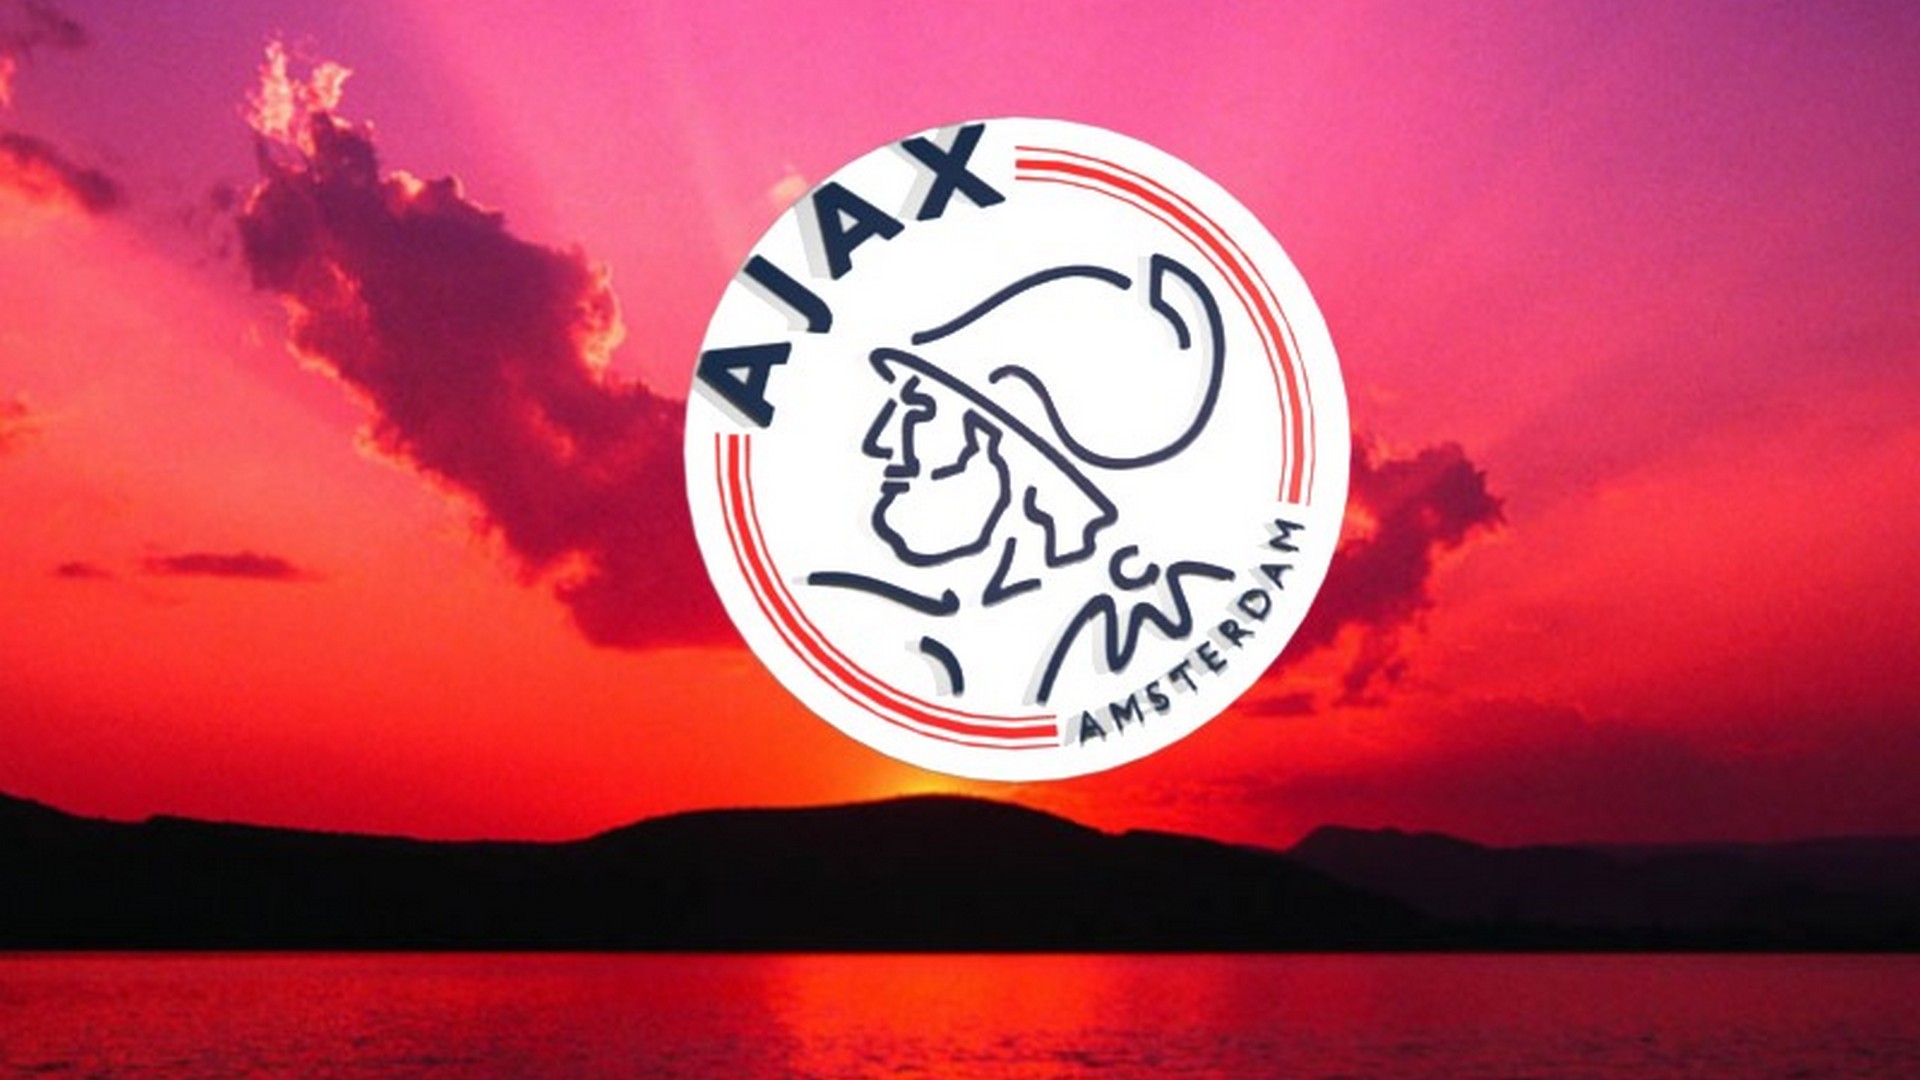 Ajax HD Wallpaper With high-resolution 1920X1080 pixel. You can use this wallpaper for your Desktop Computer Backgrounds, Mac Wallpapers, Android Lock screen or iPhone Screensavers and another smartphone device